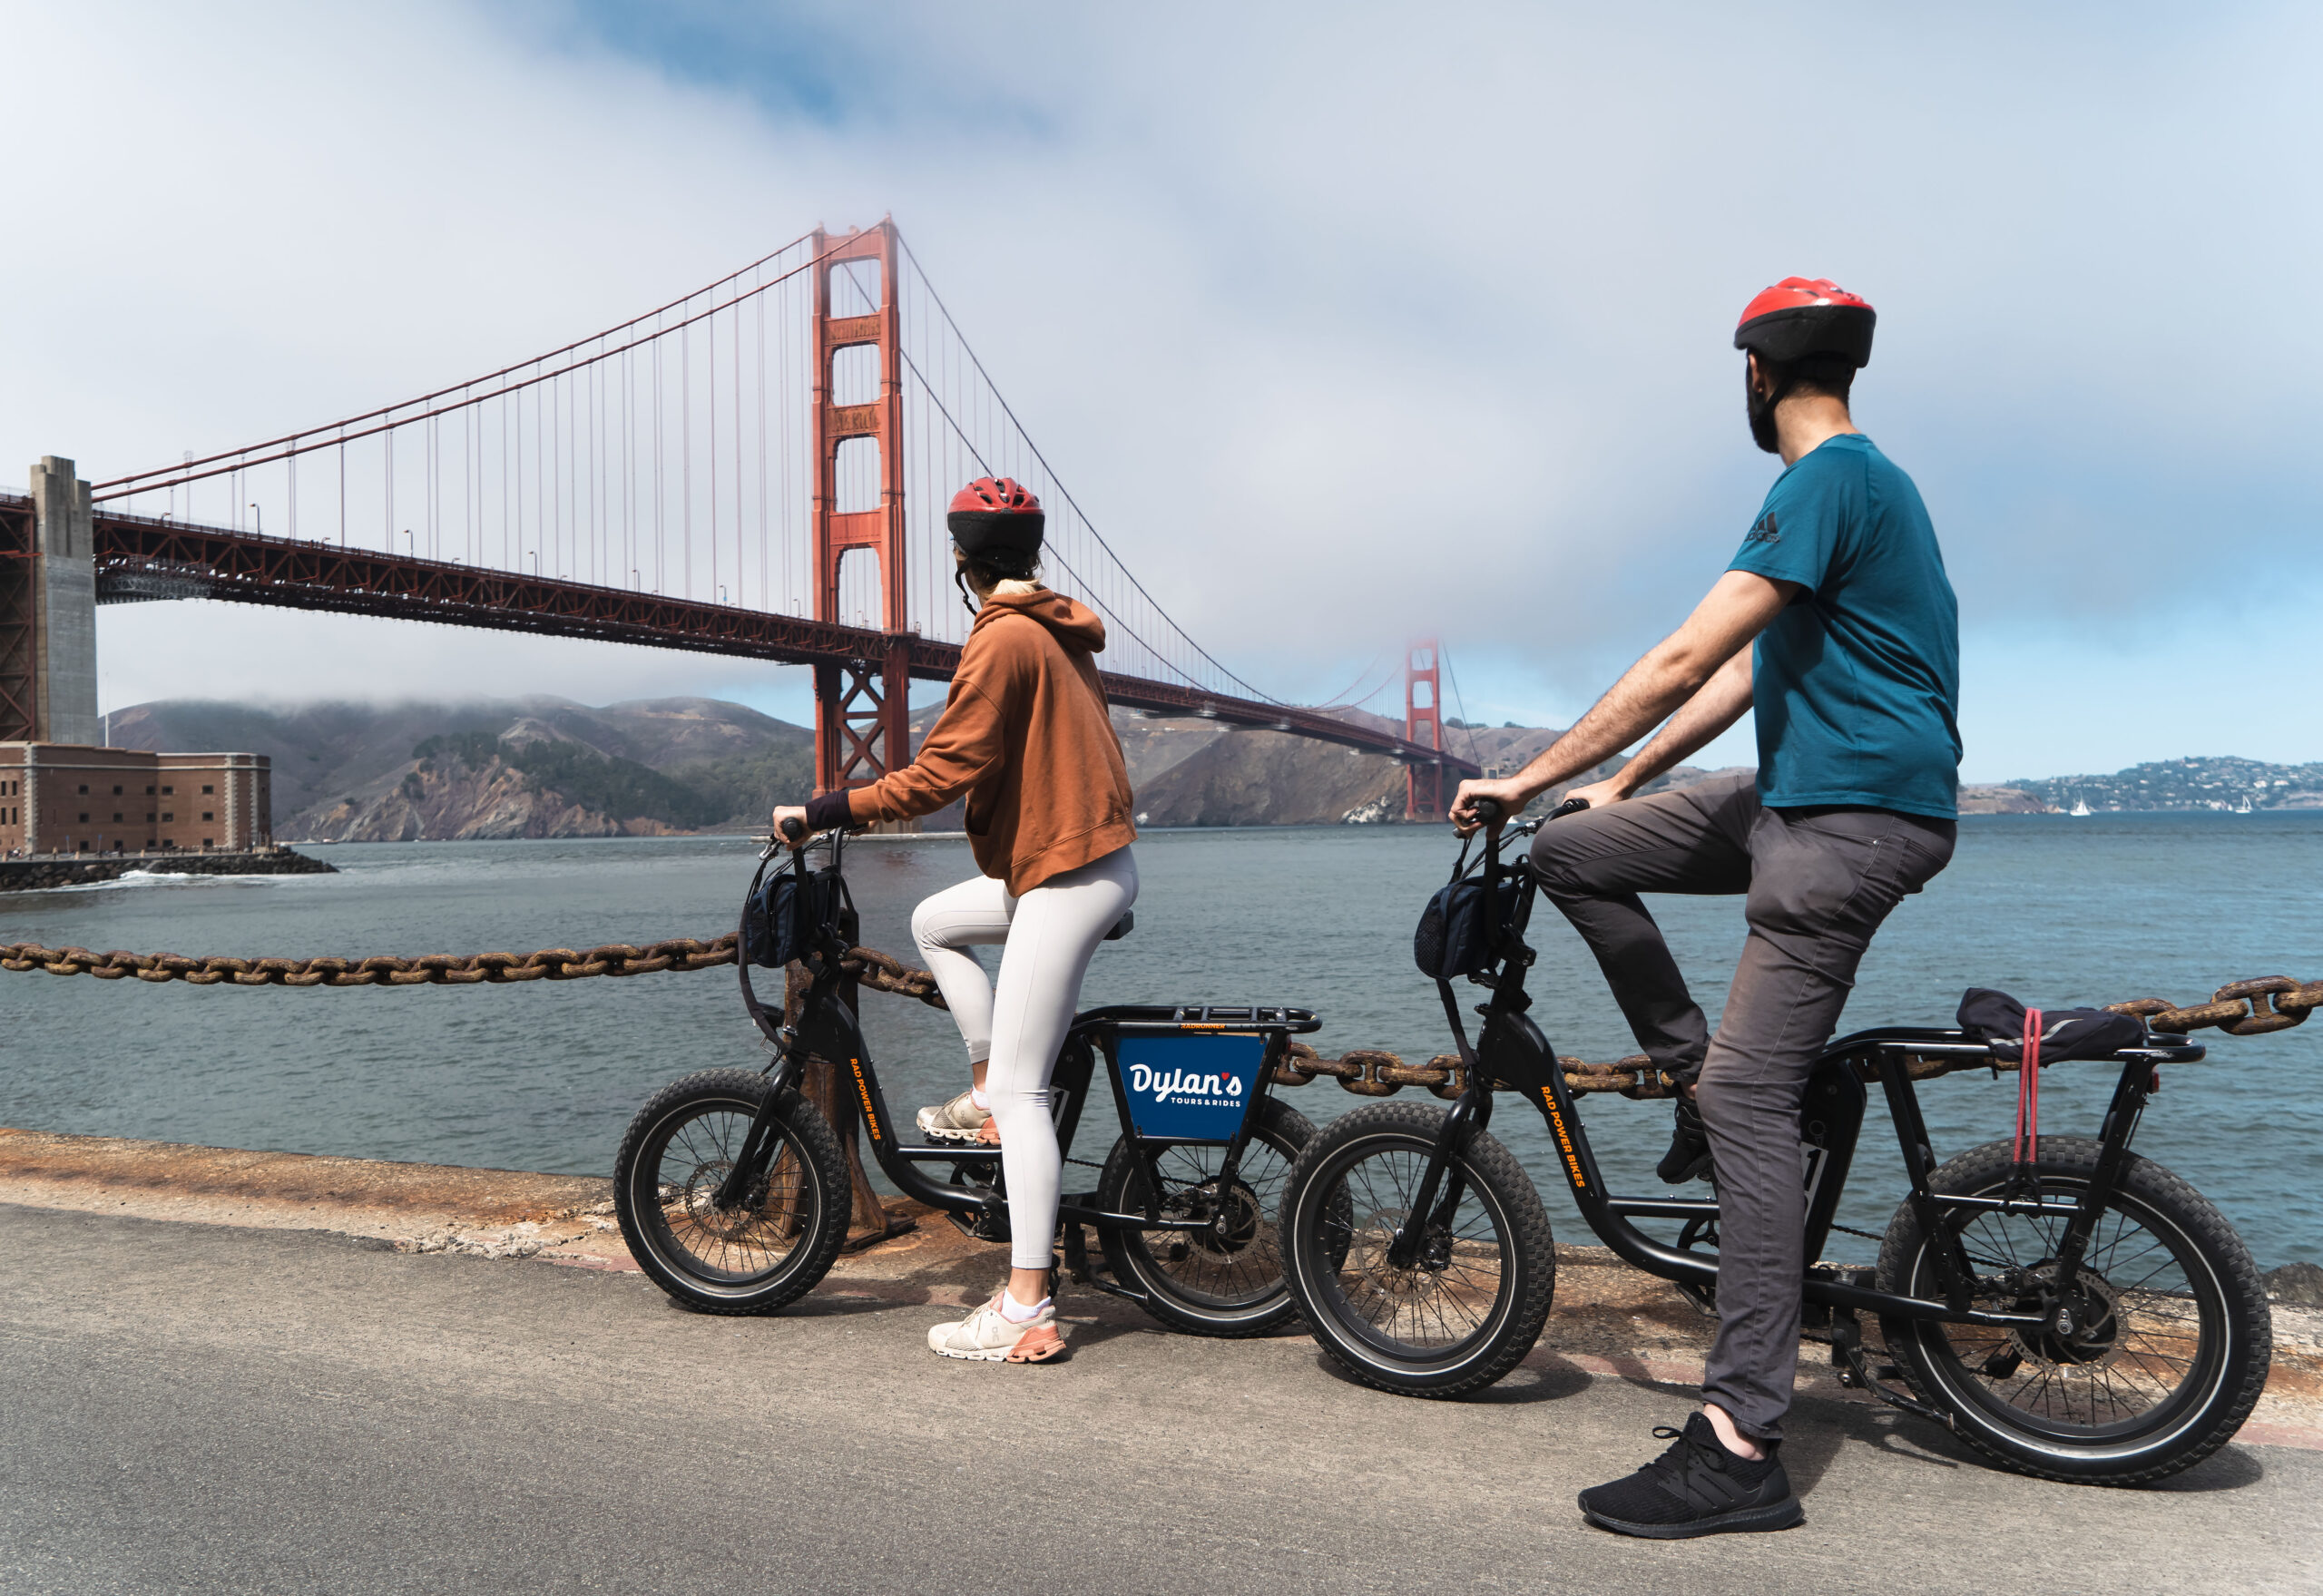 People on an E-bike date looking at the Golden Gate Bridge